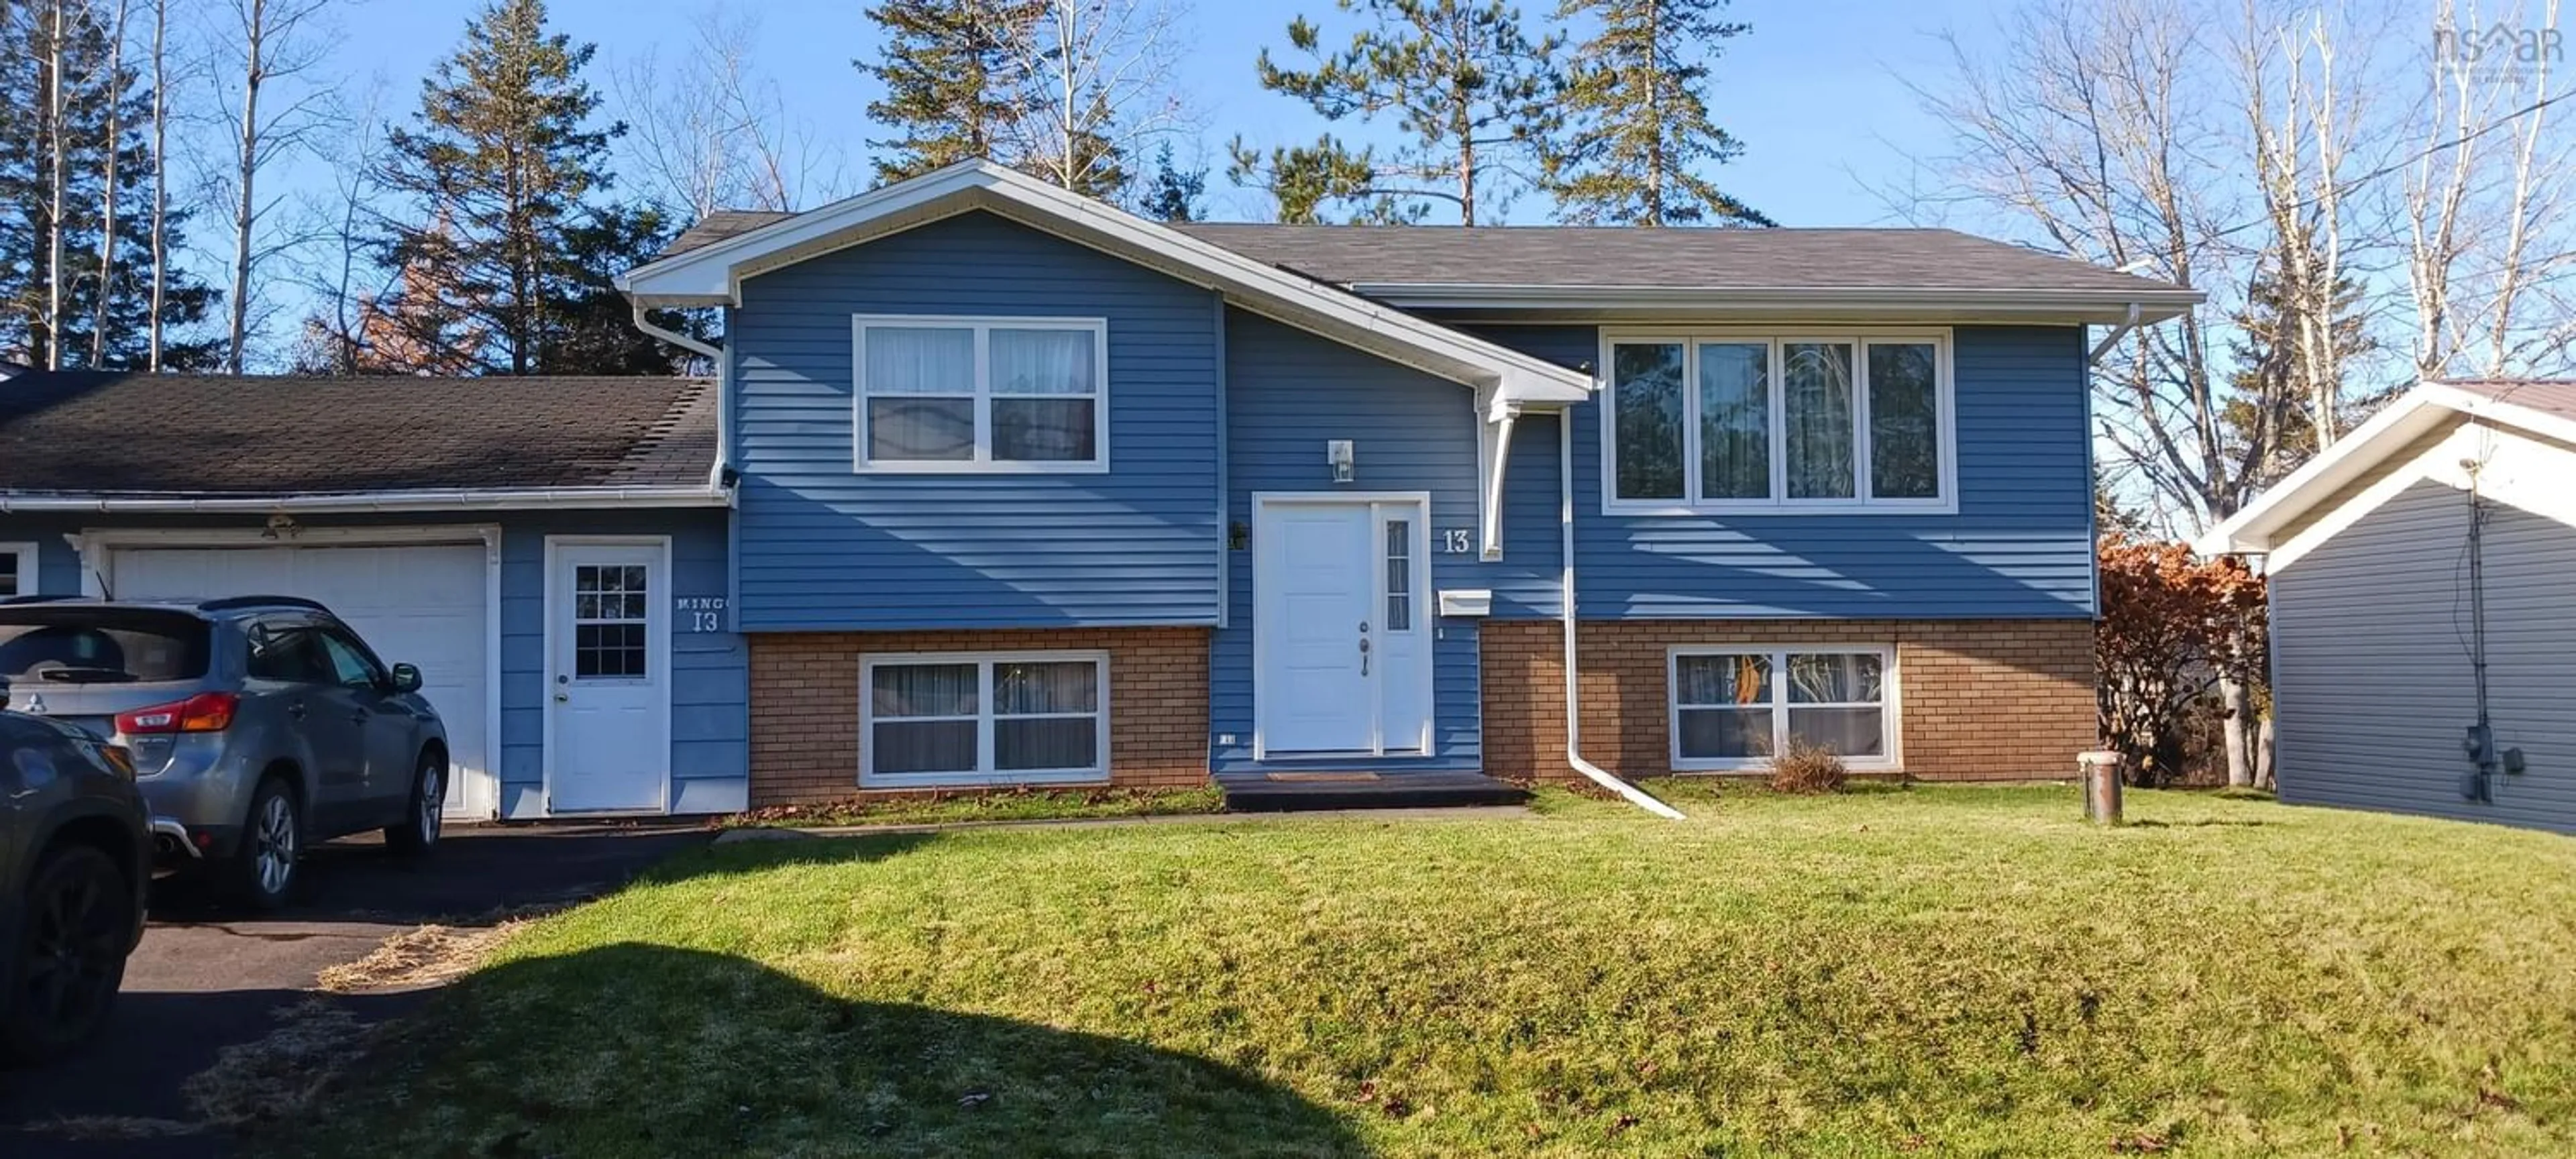 Home with vinyl exterior material for 13 Evergreen Dr, Salmon River Nova Scotia B2N 5J2